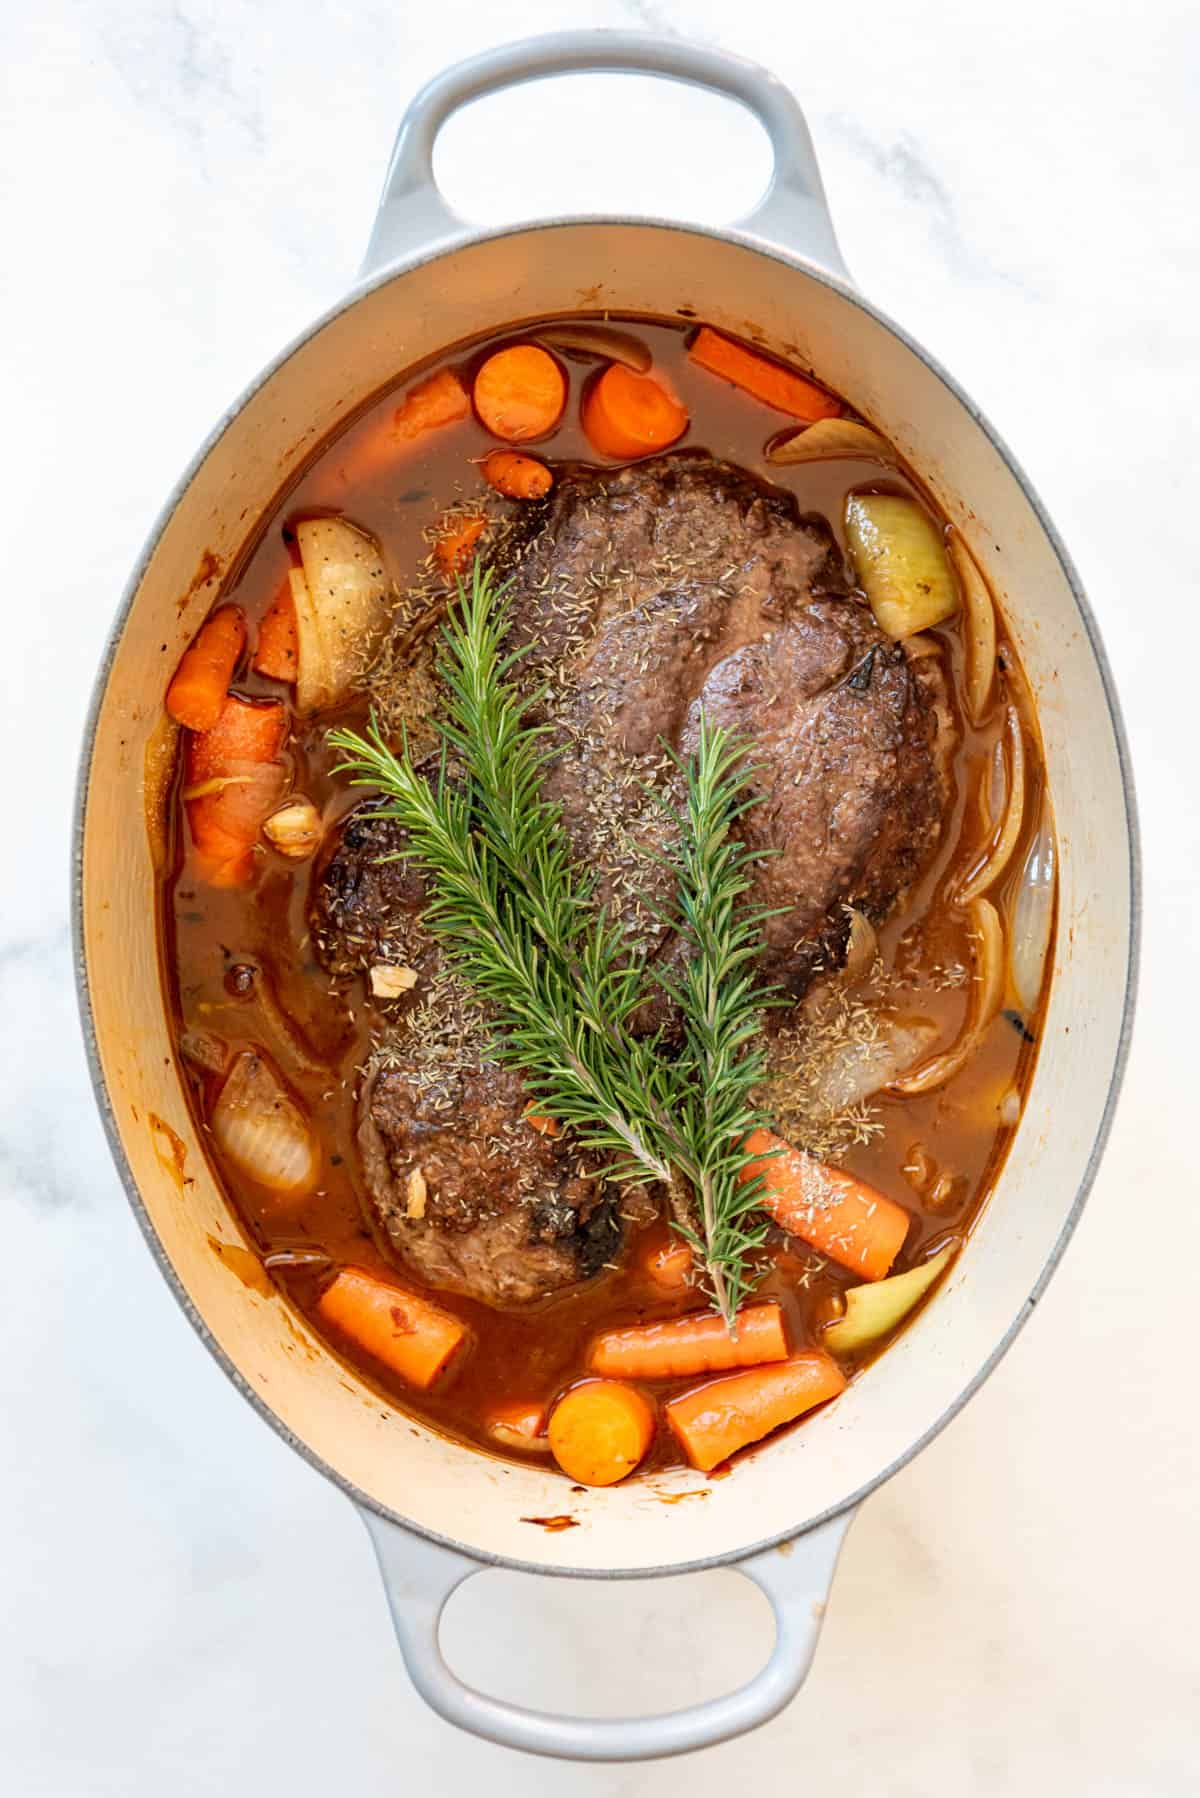 Adding rosemary sprigs and beef broth to a beef pot roast, carrots, and onions in a Dutch oven.